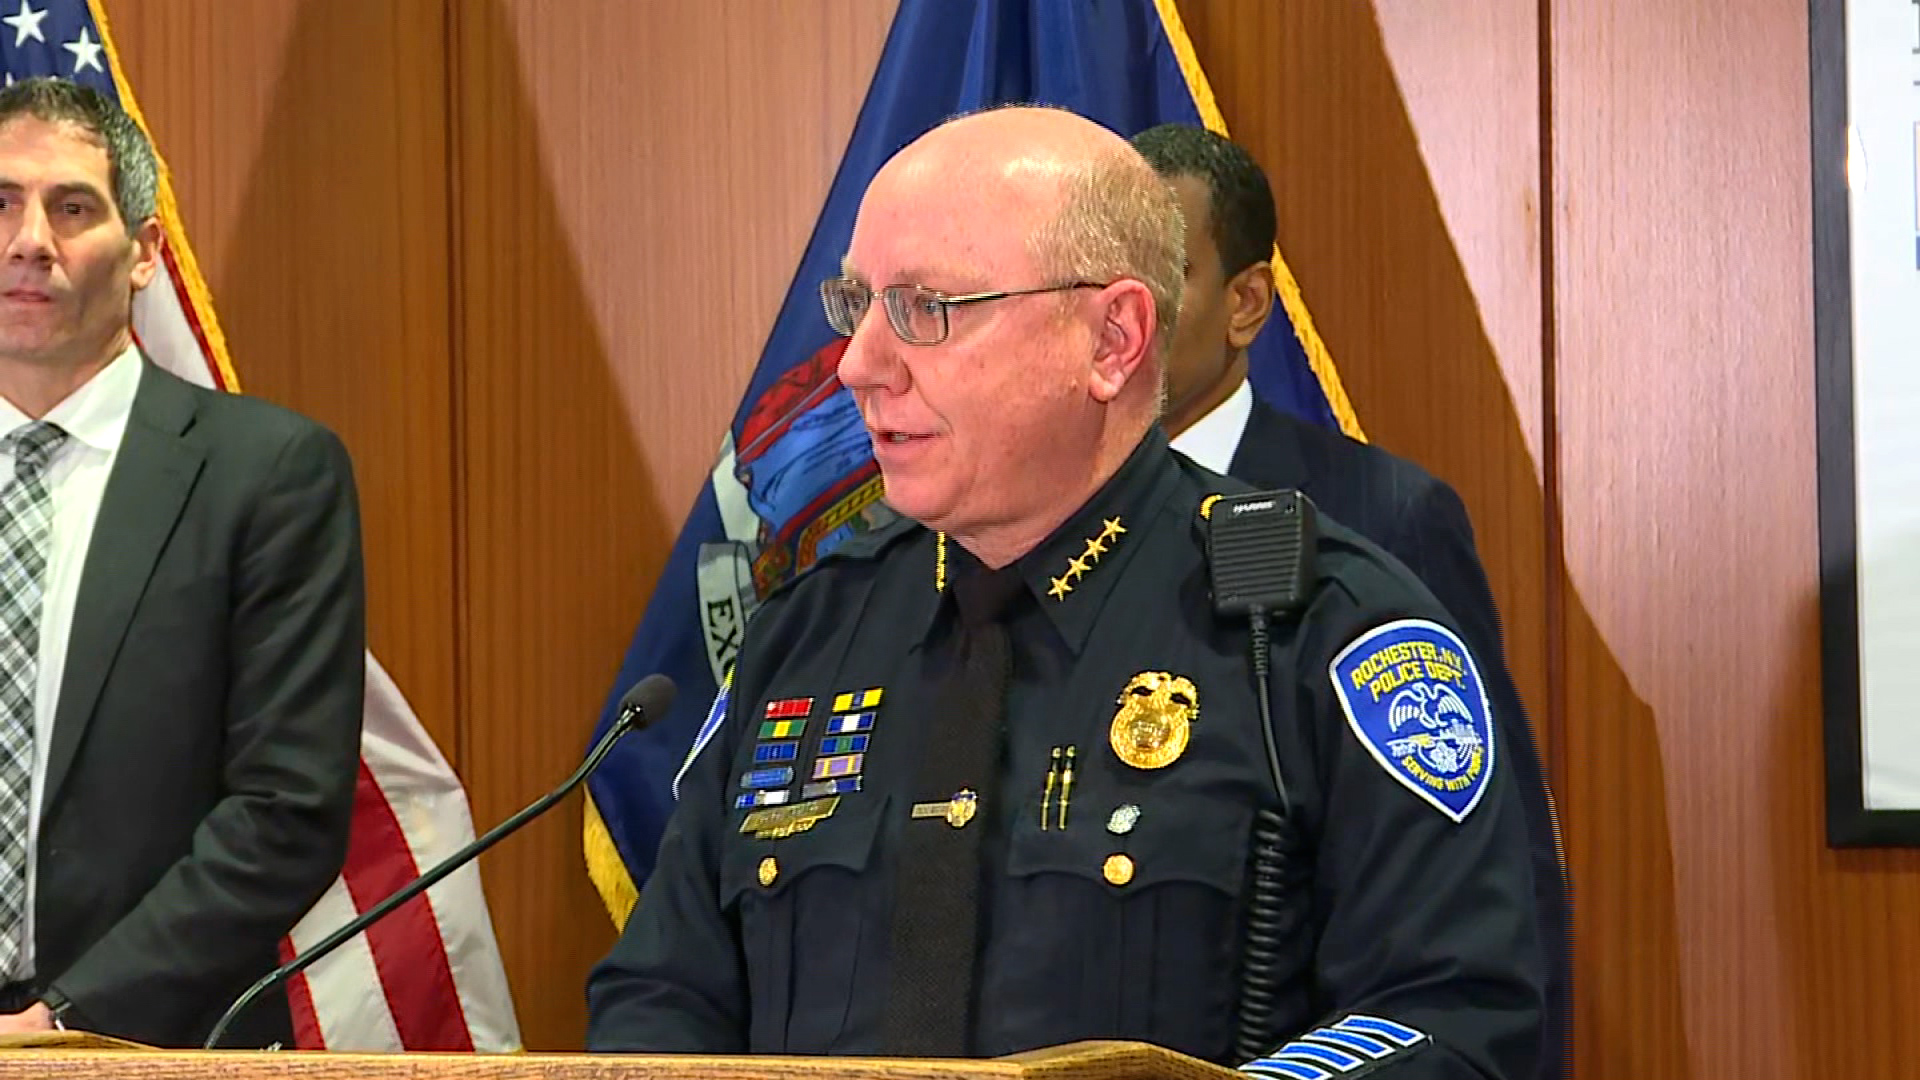 Rochester Police Chief David Smith speaks during a press conference on Tuesday.